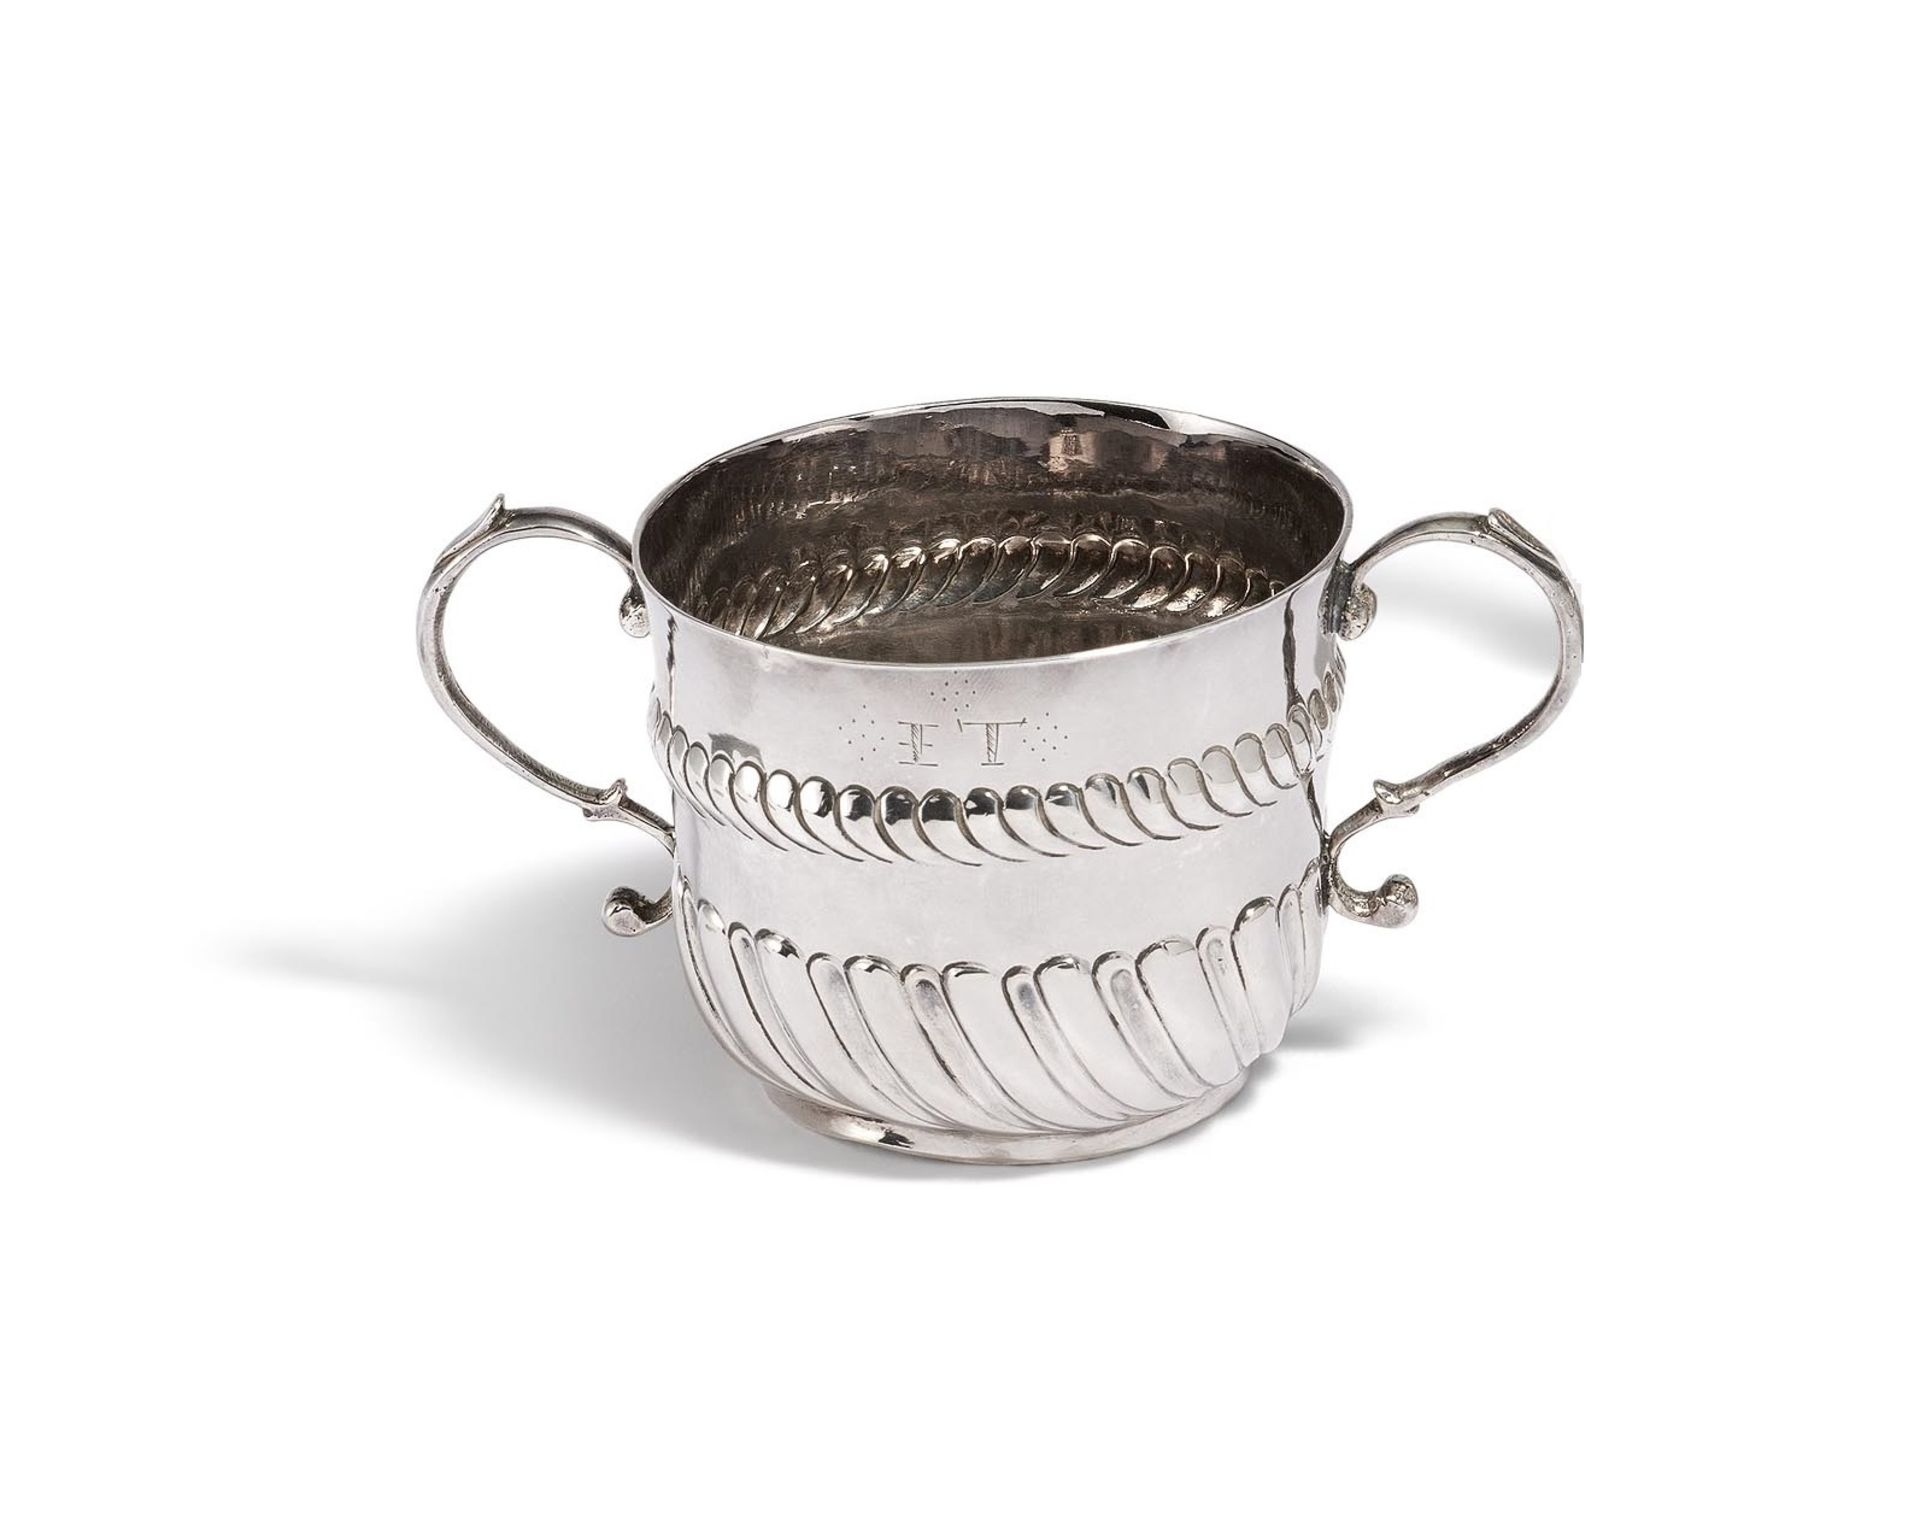 London: SILVER WILLIAM & MARY MUG WITH DOUBLE HANDLE, SO-CALLED PORRINGER